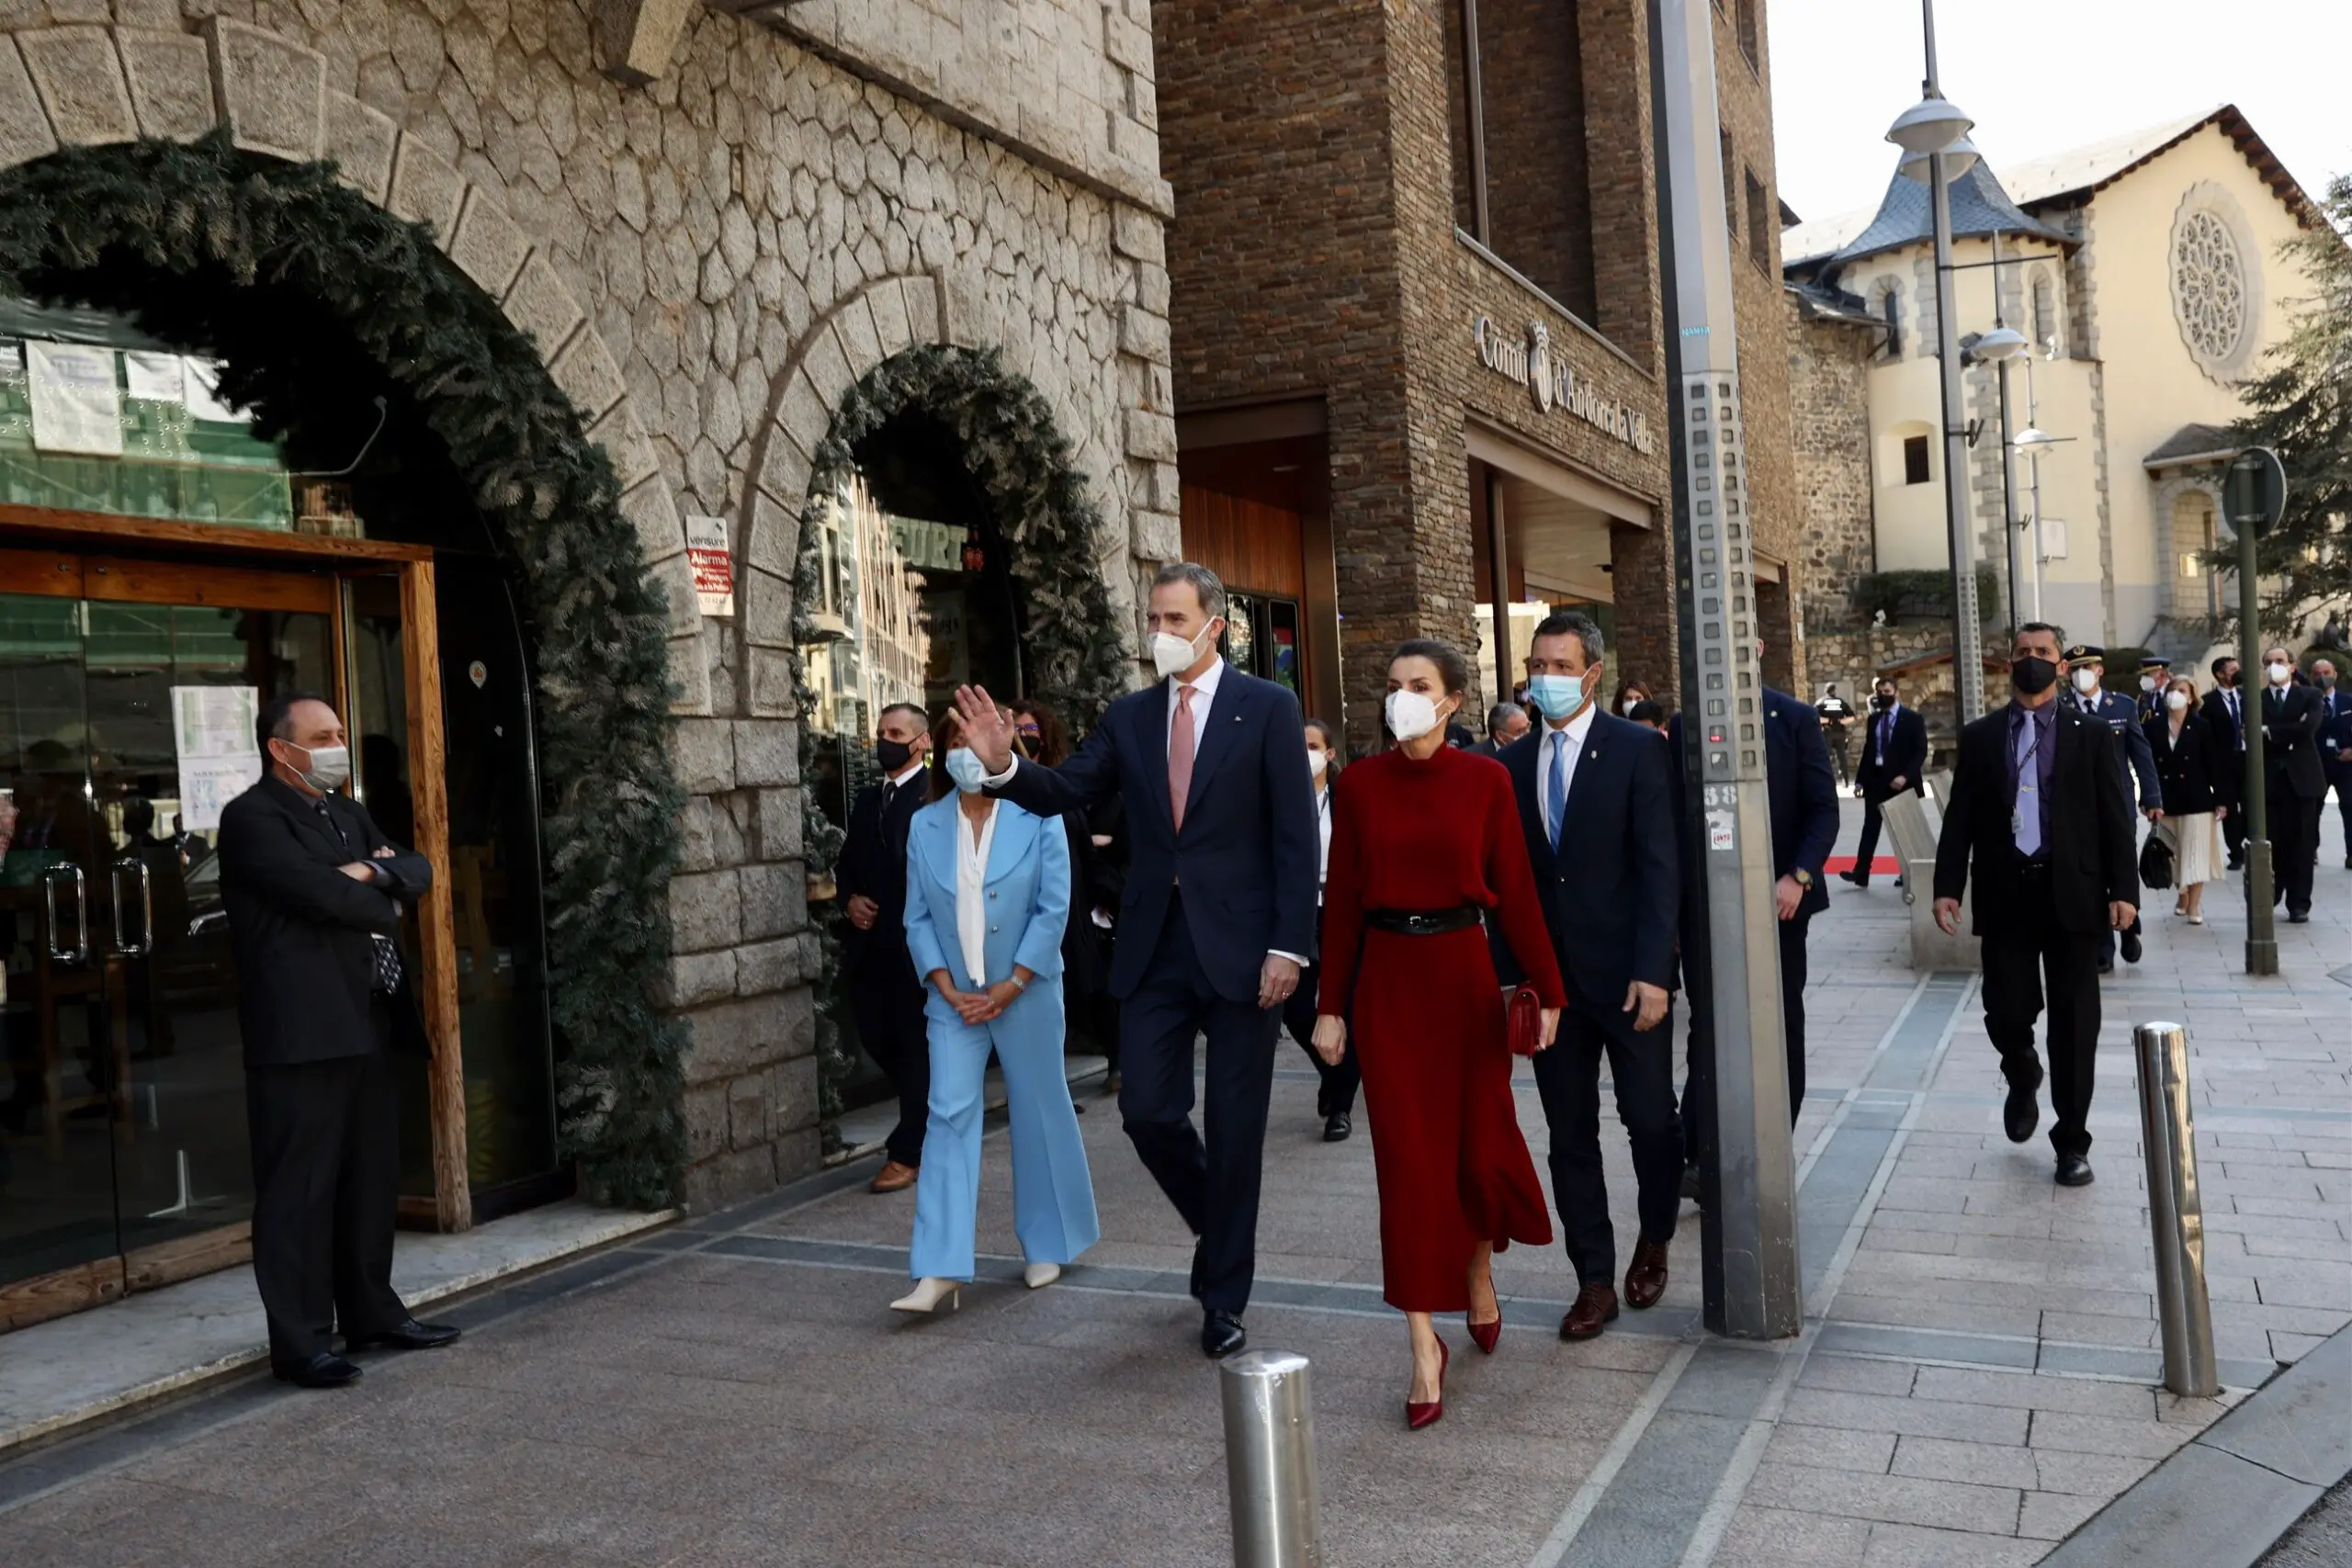 The couple had a small street tour of the city. Memebers of the public greeted the Royals very warmly